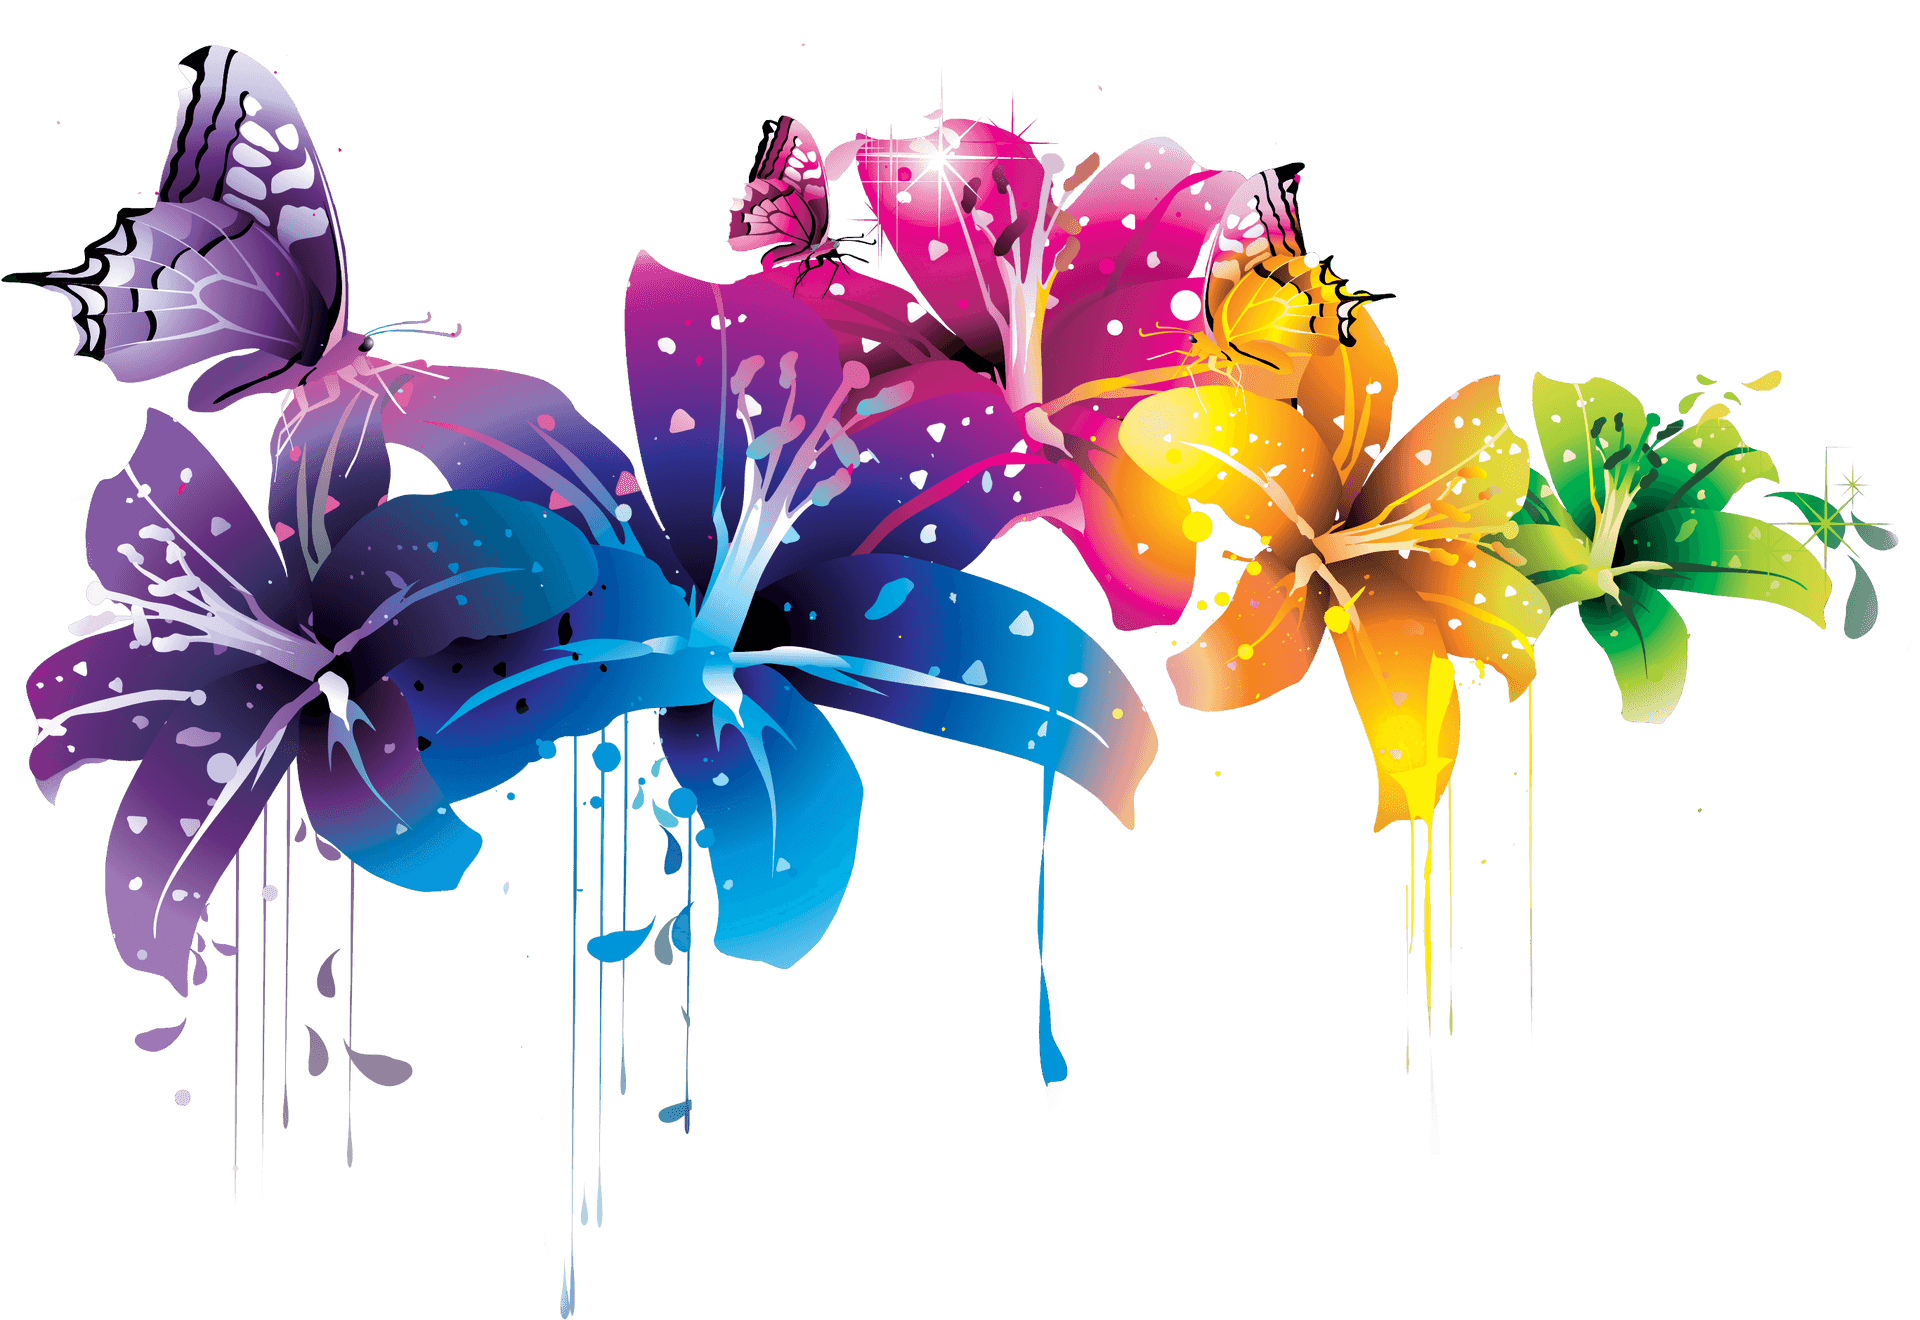 Colorful Floral Vectorwith Butterflies PNG image